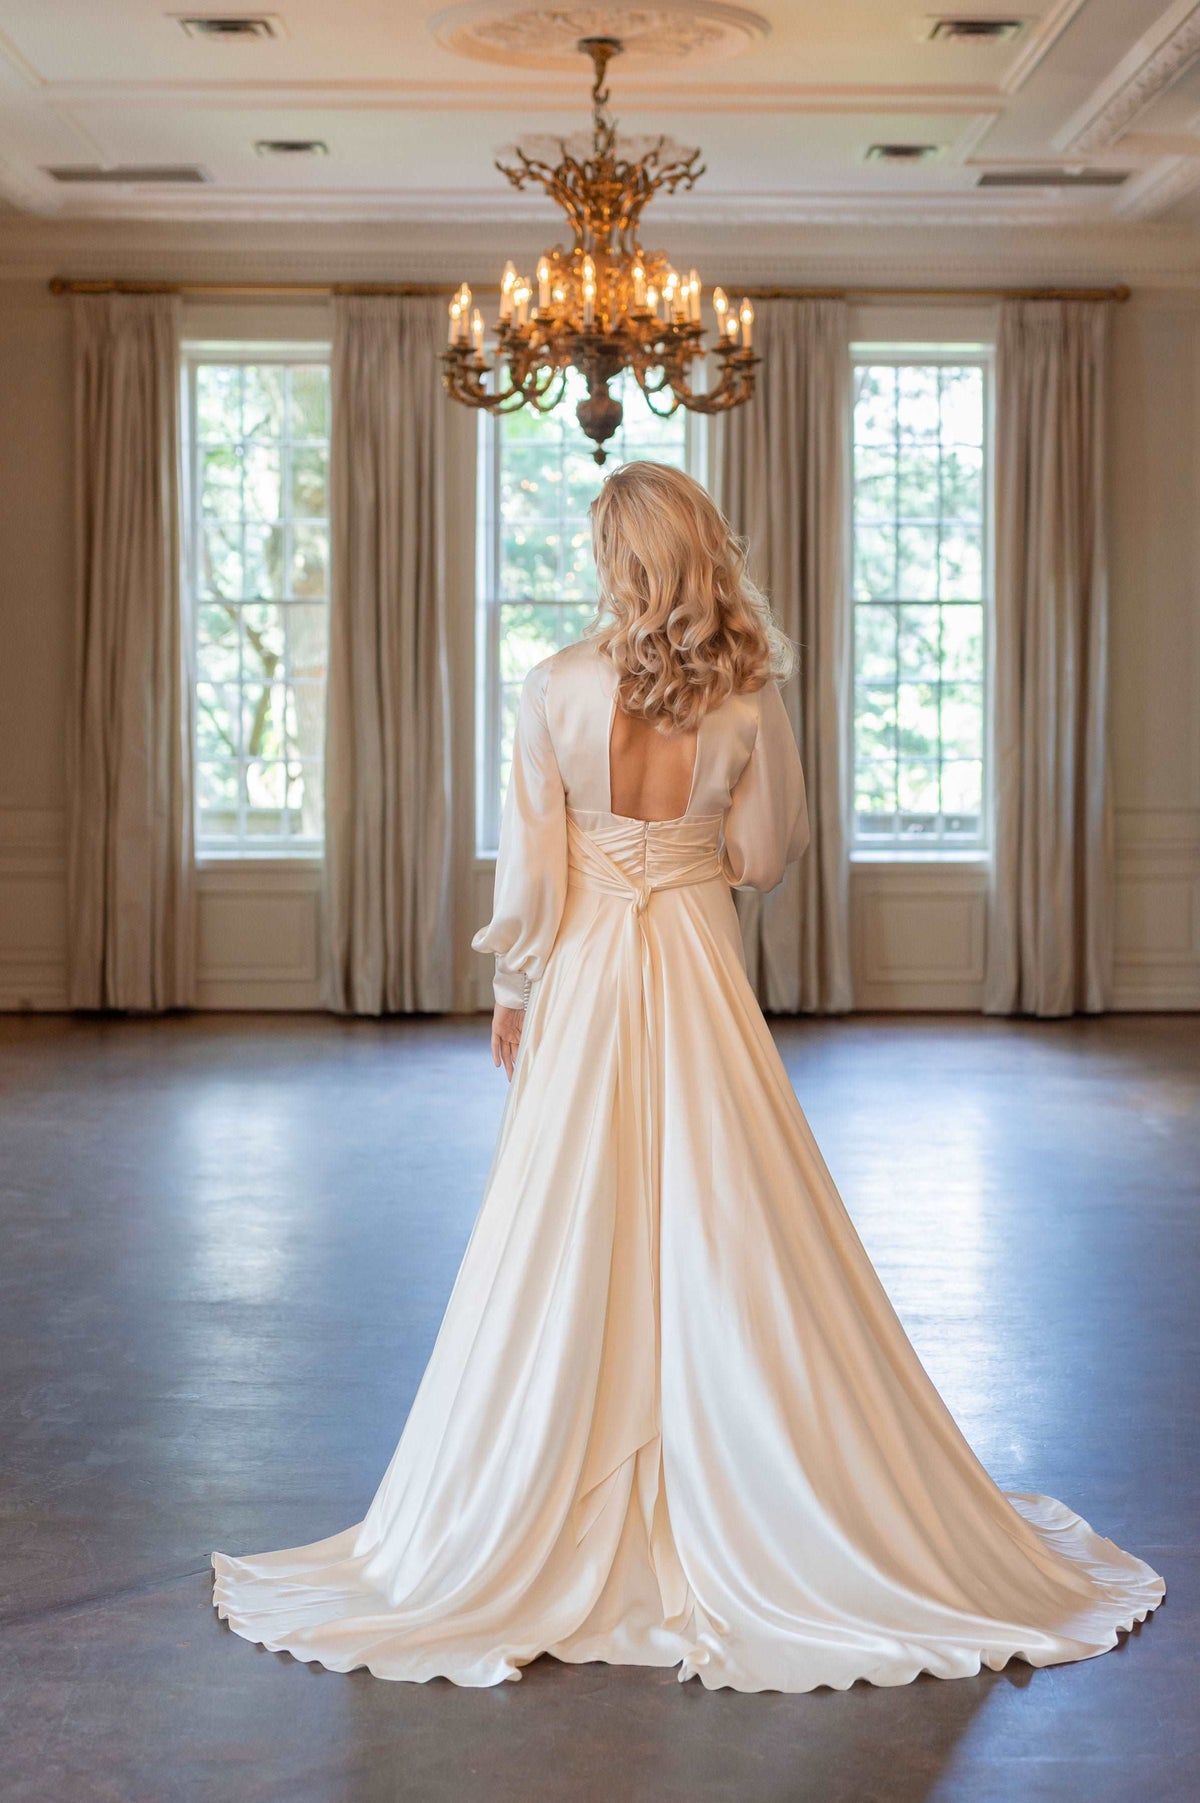 Old Hollywood style wedding dress inspired by Halston. Pure silk satin.High neckline, poet sleeves, key hole back. Flowy circle skirt. Designed by Catherine Langlois, Canada.